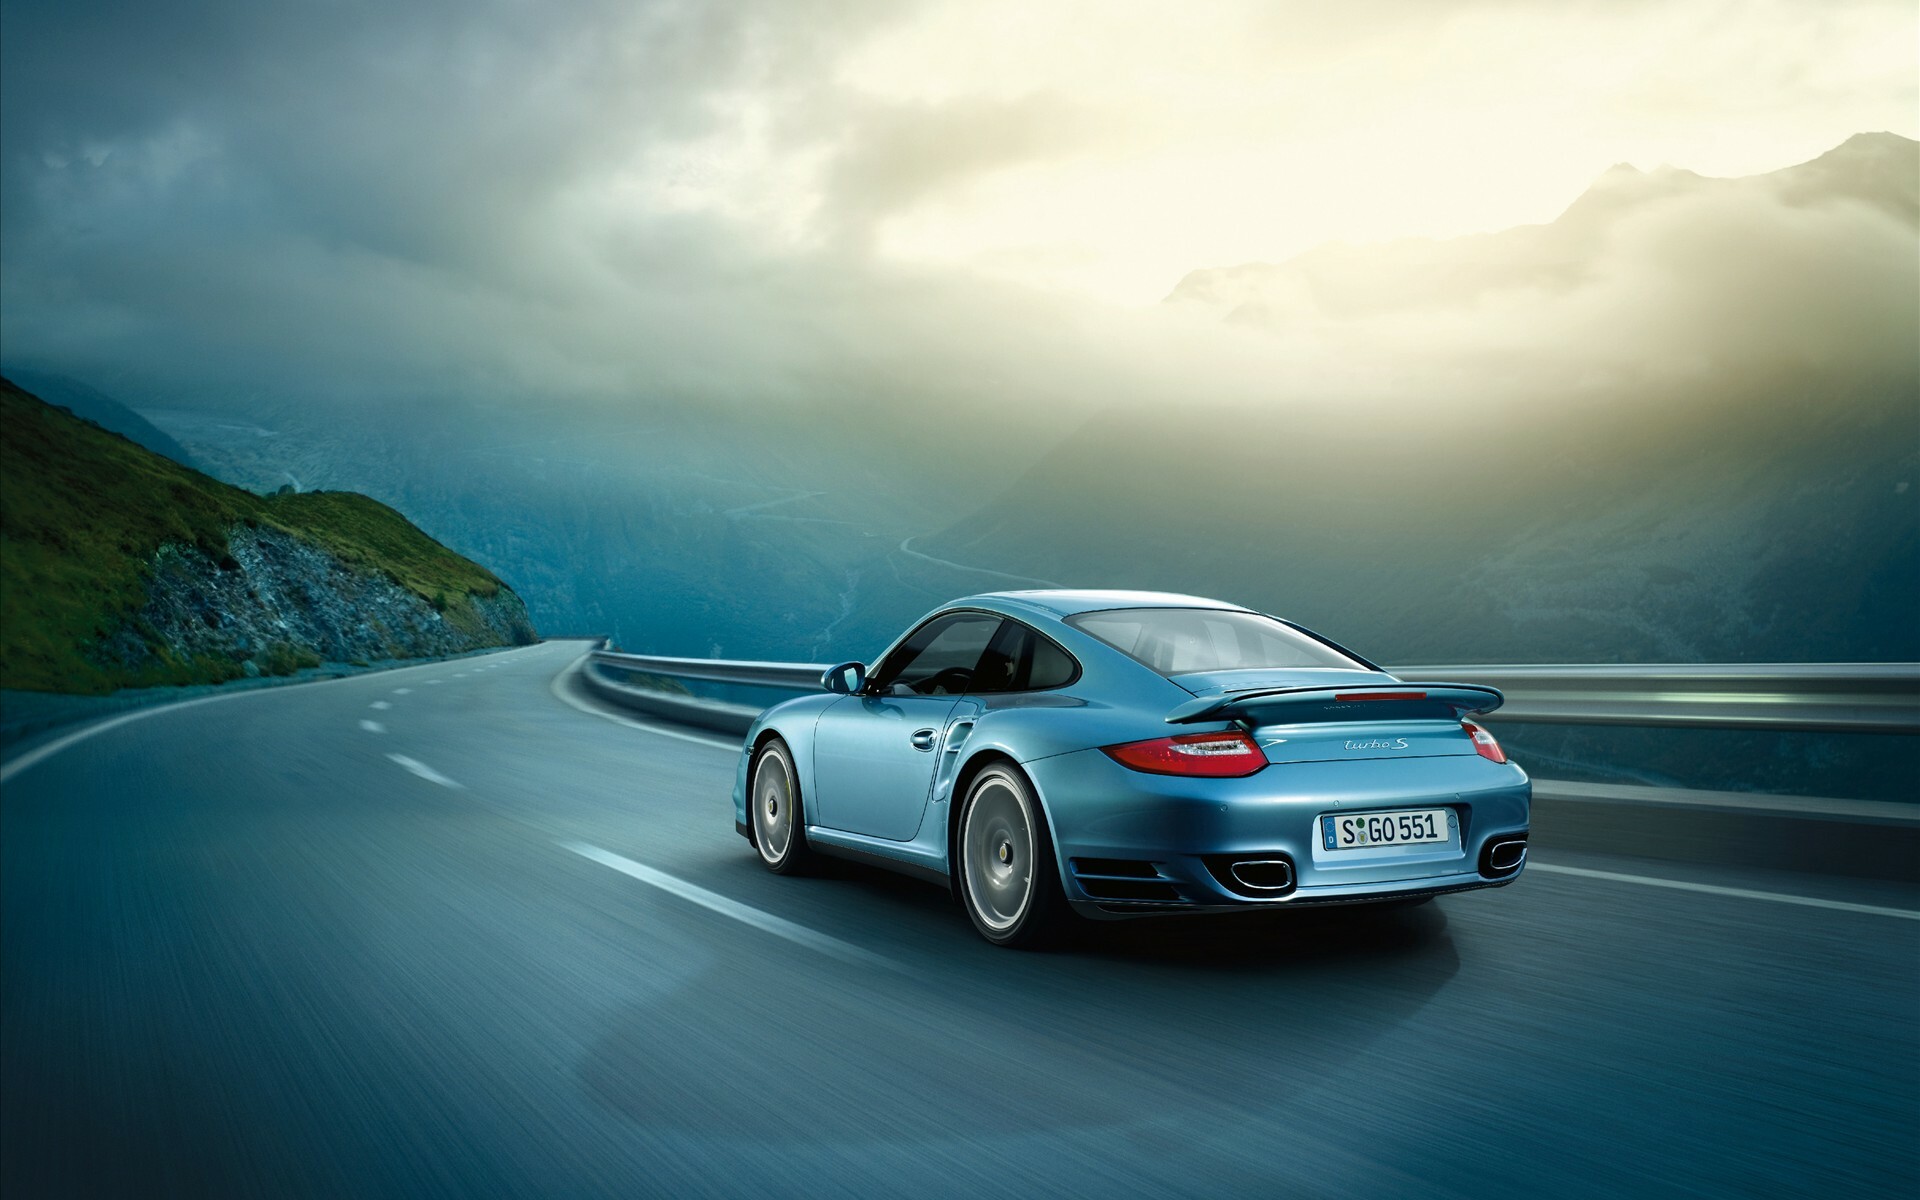 Porsche 911: The 997 lineup includes both 2- and 4-wheel-drive variants, named Carrera and Carrera 4. 1920x1200 HD Wallpaper.